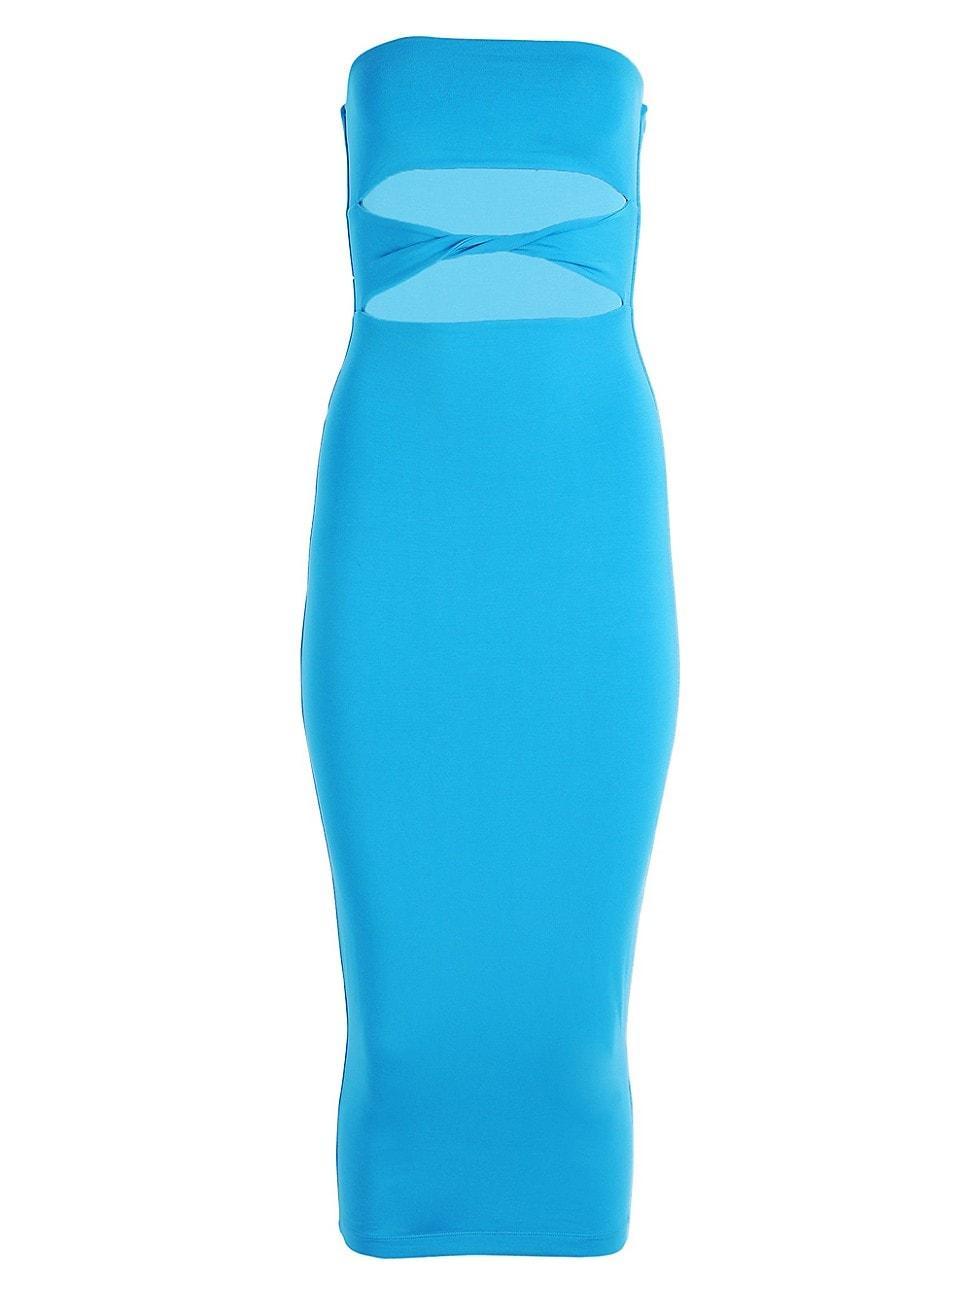 SER.O.YA Bristol Midi Dress in Turquoise - Teal. Size L (also in XXS, XS, S, M, XL). Product Image